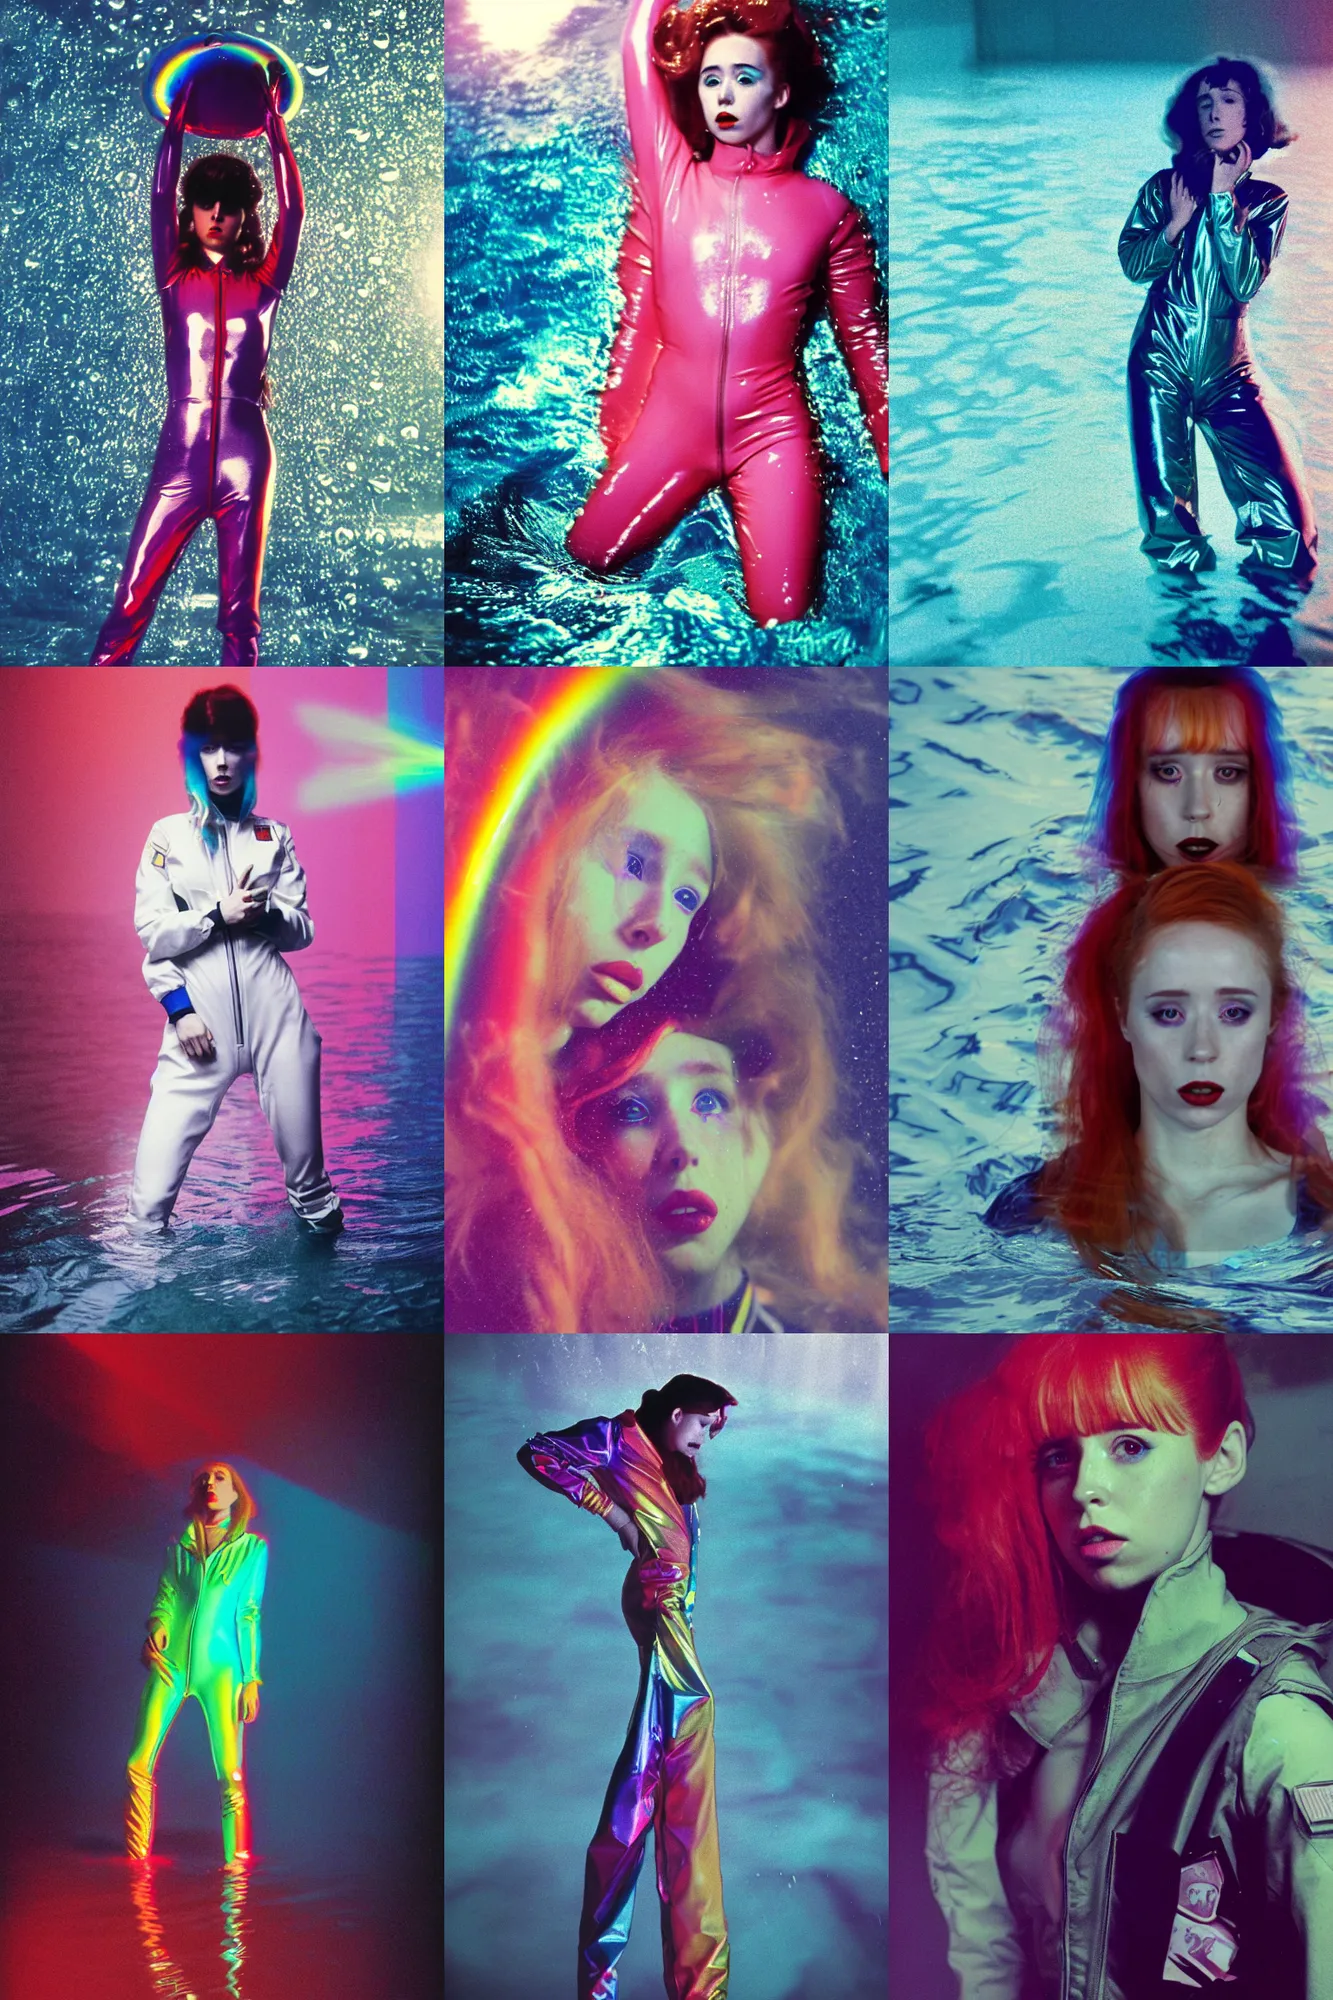 Prompt: Beautiful Holly Herndon style occult sketchbook style Fashion photography portrait tokyo top gun(1980) movie still from underwater space dance scene of model, wearing refracting rainbow diffusion wet plastic Balenciaga designed specular highlights anti-g flight jump suit, half submerged in heavy nighttime floods, water to waist, , épaule devant pose;pursed lips;athletic; pixie hair,eye contact, ultra realistic, Panavision Panaflex X , Technicolor, 8K, 35mm lens, three point perspective, tilt shift mirror kaleidoscope background, chiaroscuro, highly detailed, by moma, by Nabbteeri by Sergey Piskunov